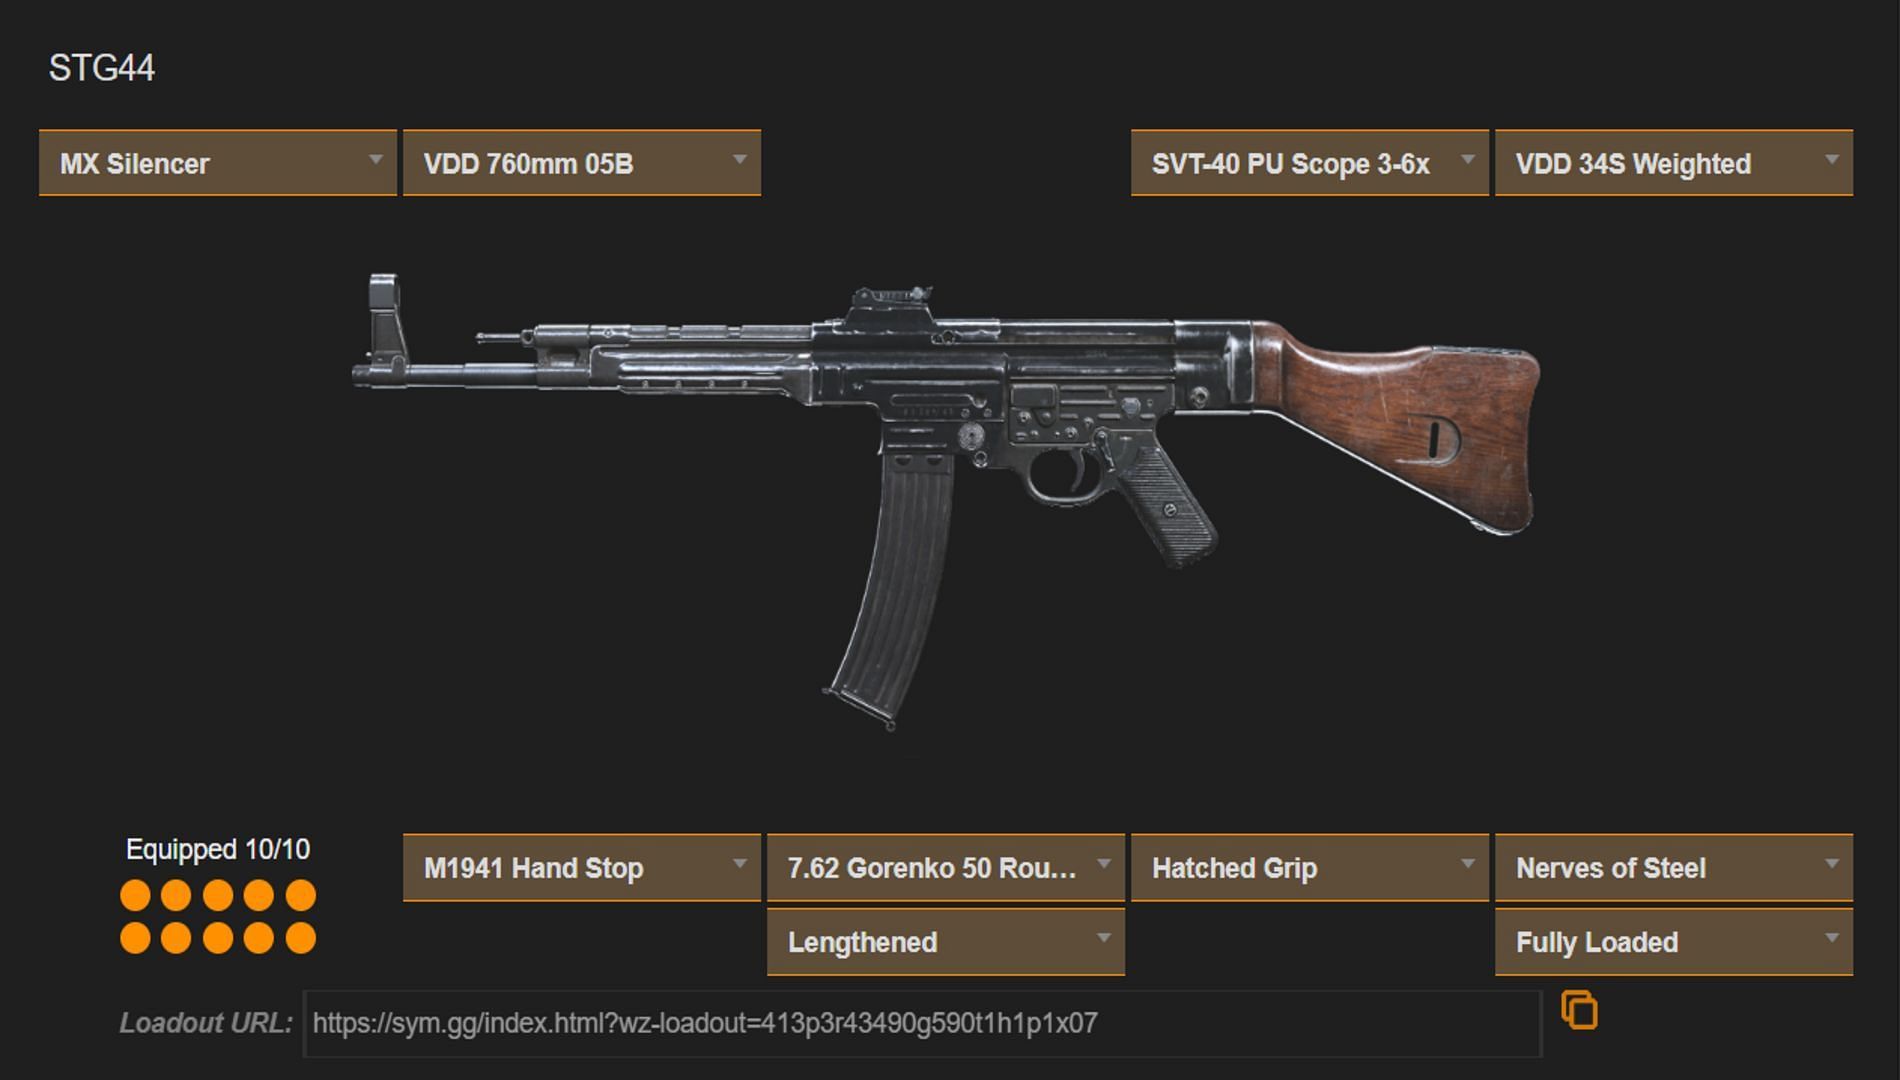 Call of Duty: Warzone STG44 loadout (Image via sym.gg)